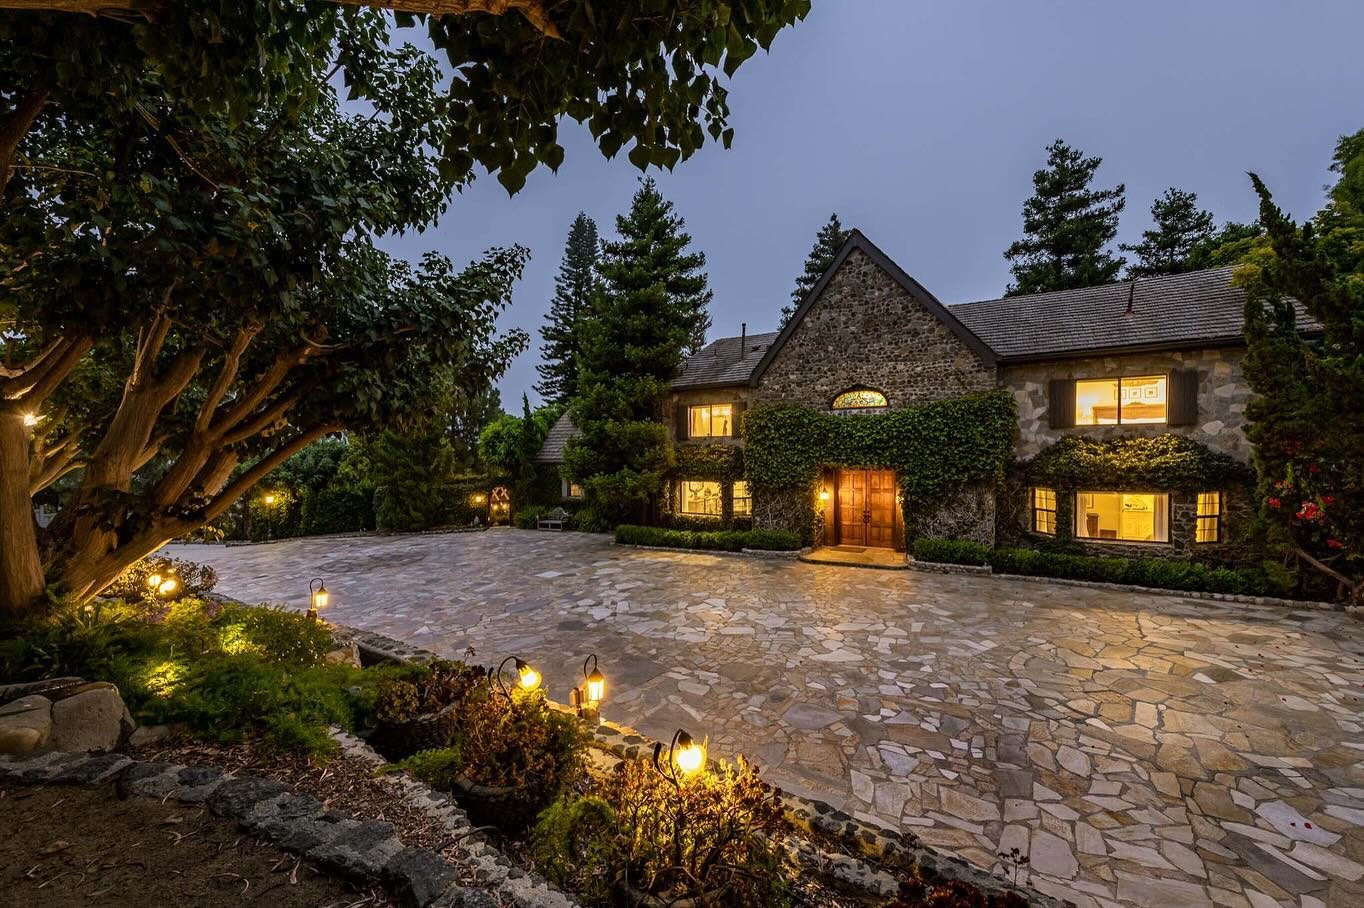 Stone Manor is a quiet and cozy hideaway on a rainy day in Malibu
.
.
.
#realestatephotography #losangelesrealestatephotographer #losangelesrealestatephotography #losangelesrealestate #luxuryrealestate  #losangelesluxuryrealestate  #milliondollarlist